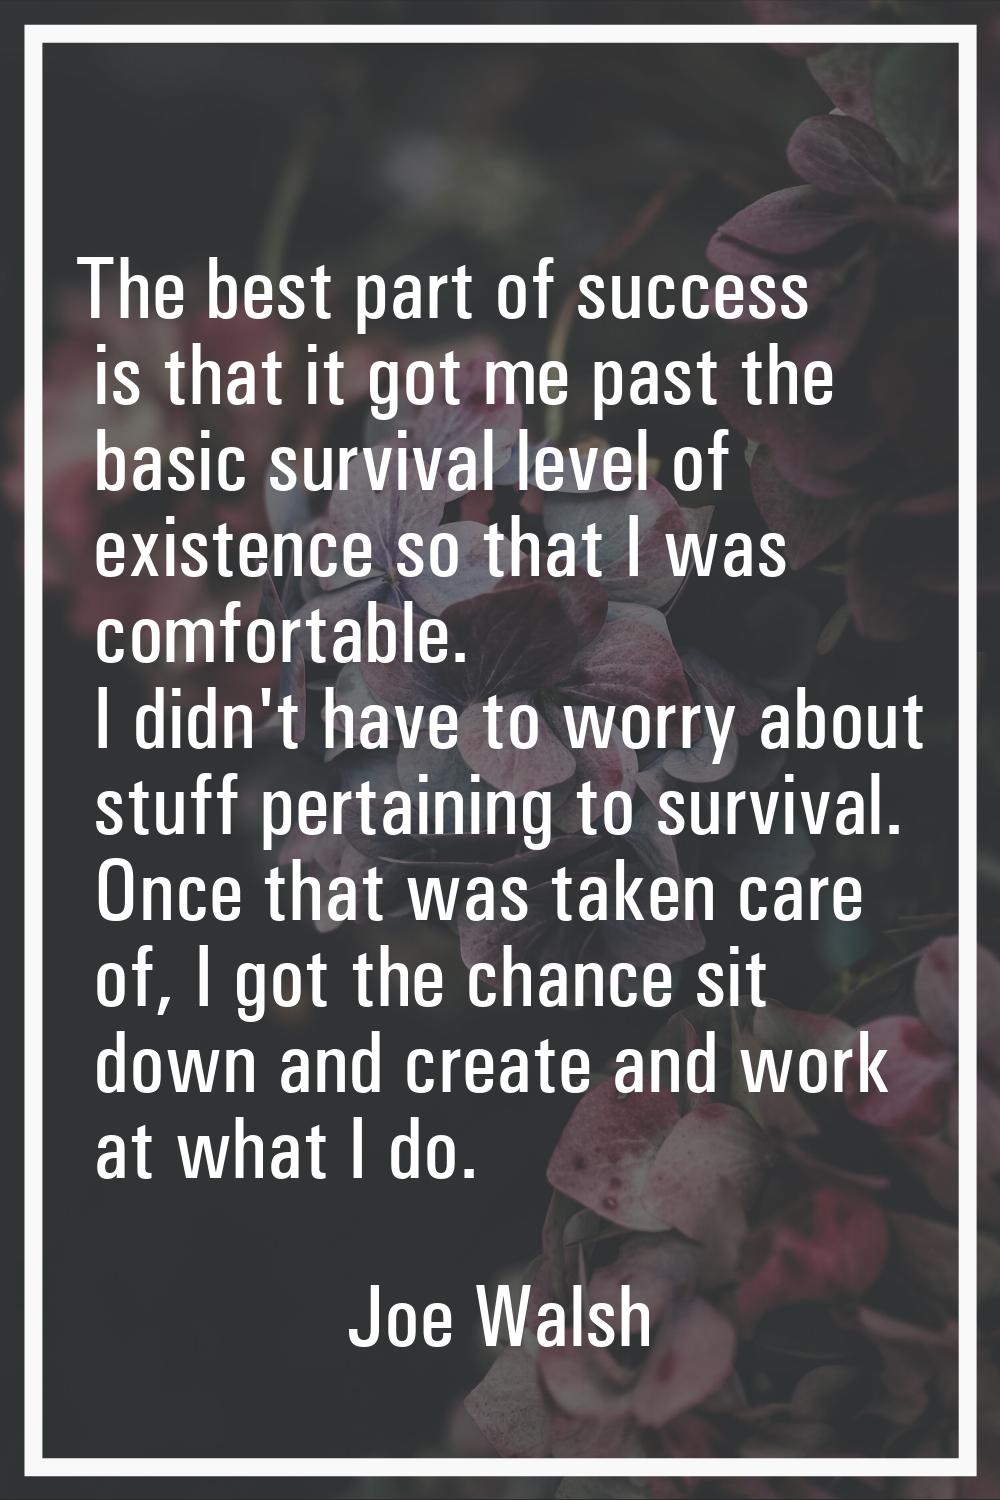 The best part of success is that it got me past the basic survival level of existence so that I was